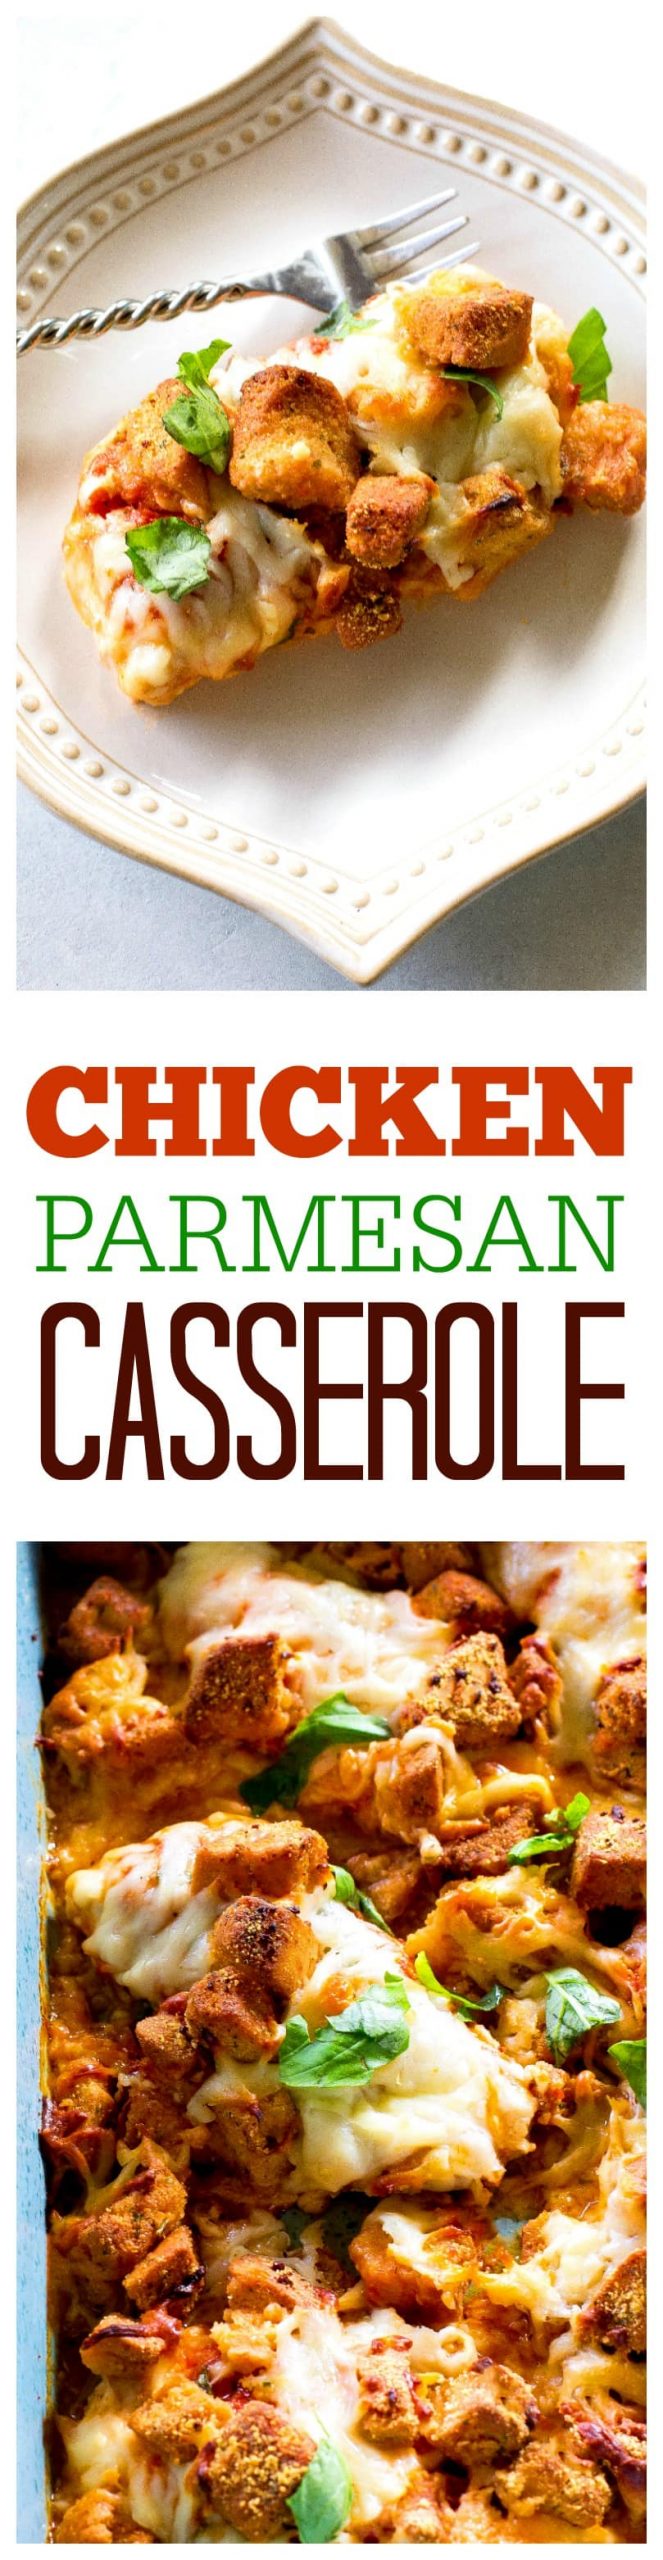 Chicken Parmesan Casserole - no frying this cheesy Parmesan chicken topped with crunchy garlic croutons. #chicken #parmesan #casserole #recipe #italian